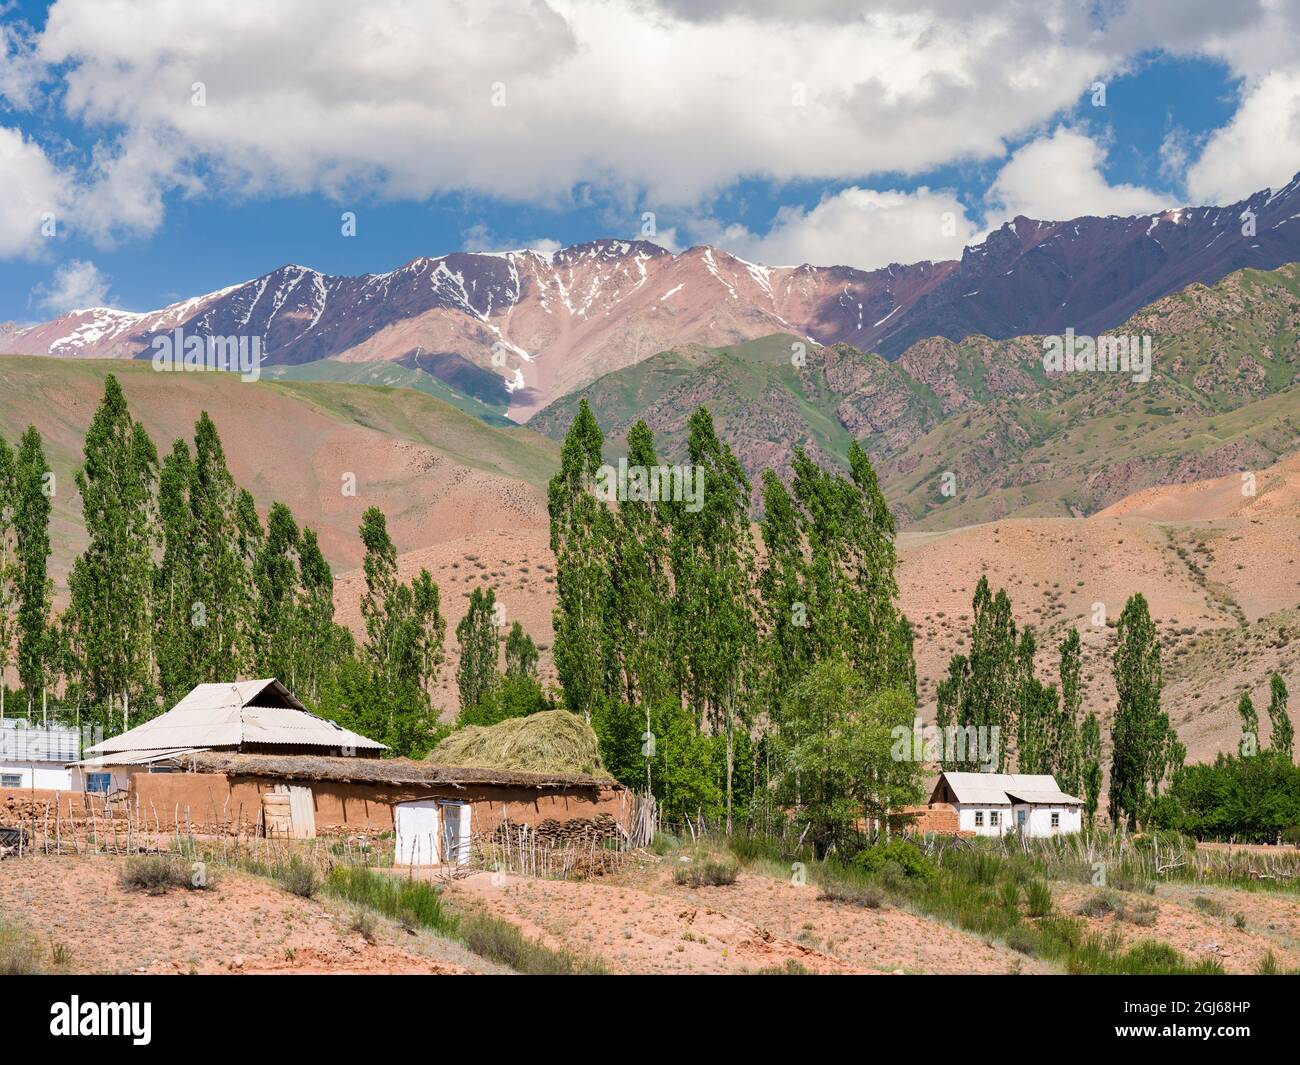 Village Kyzyl-Oy. Valley of river Suusamyr in the Tien Shan Mountains, Kyrgyzstan. (Editorial Use Only) Stock Photo